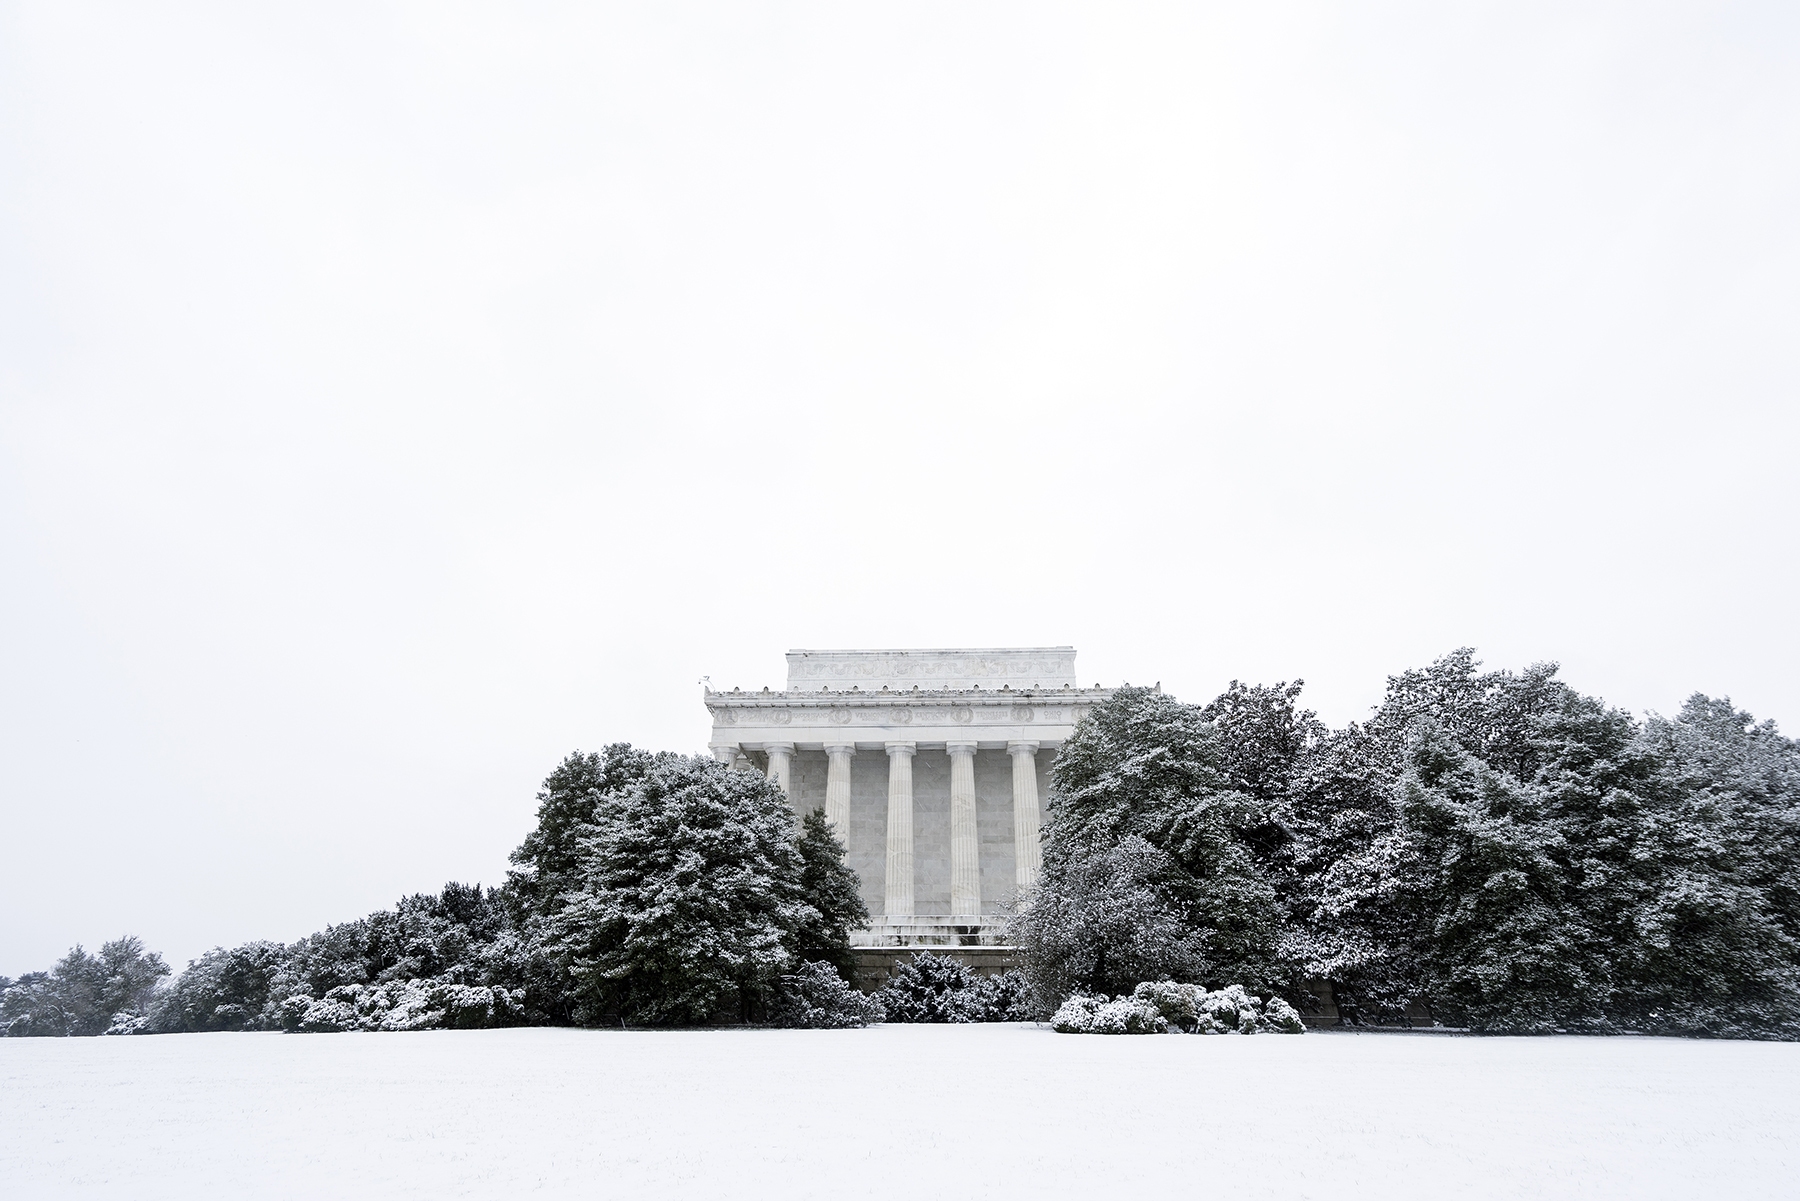 lincoln memorial, washington dc, snow, winter, bushes, trees, memorial, architecture, winter, presidents day, february, white, simple